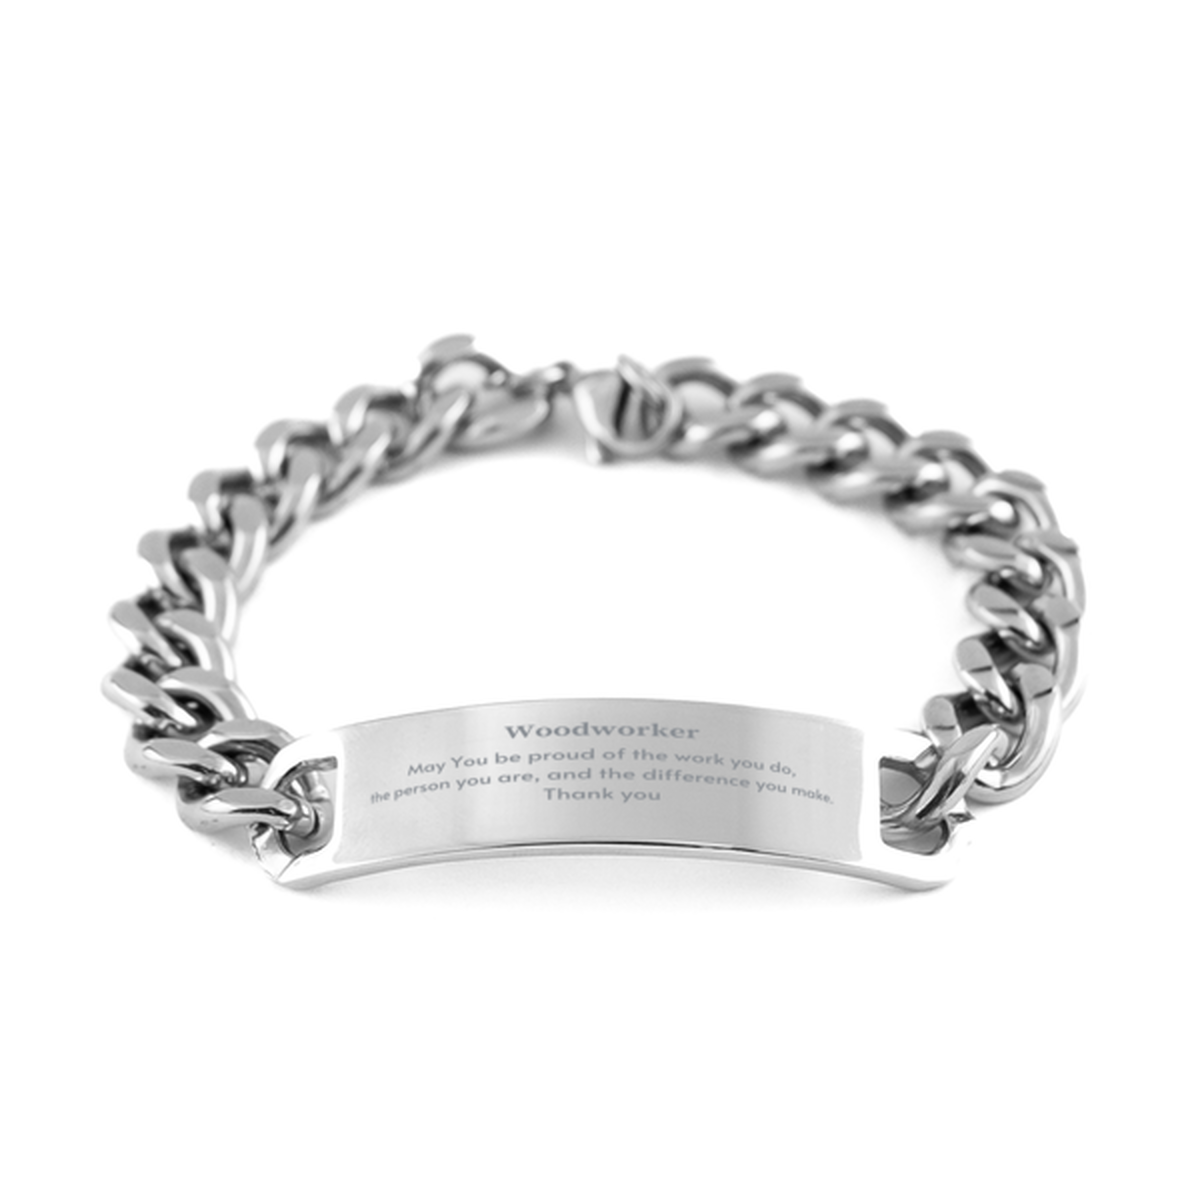 Heartwarming Cuban Chain Stainless Steel Bracelet Retirement Coworkers Gifts for Woodworker, Woodworker May You be proud of the work you do, the person you are Gifts for Boss Men Women Friends